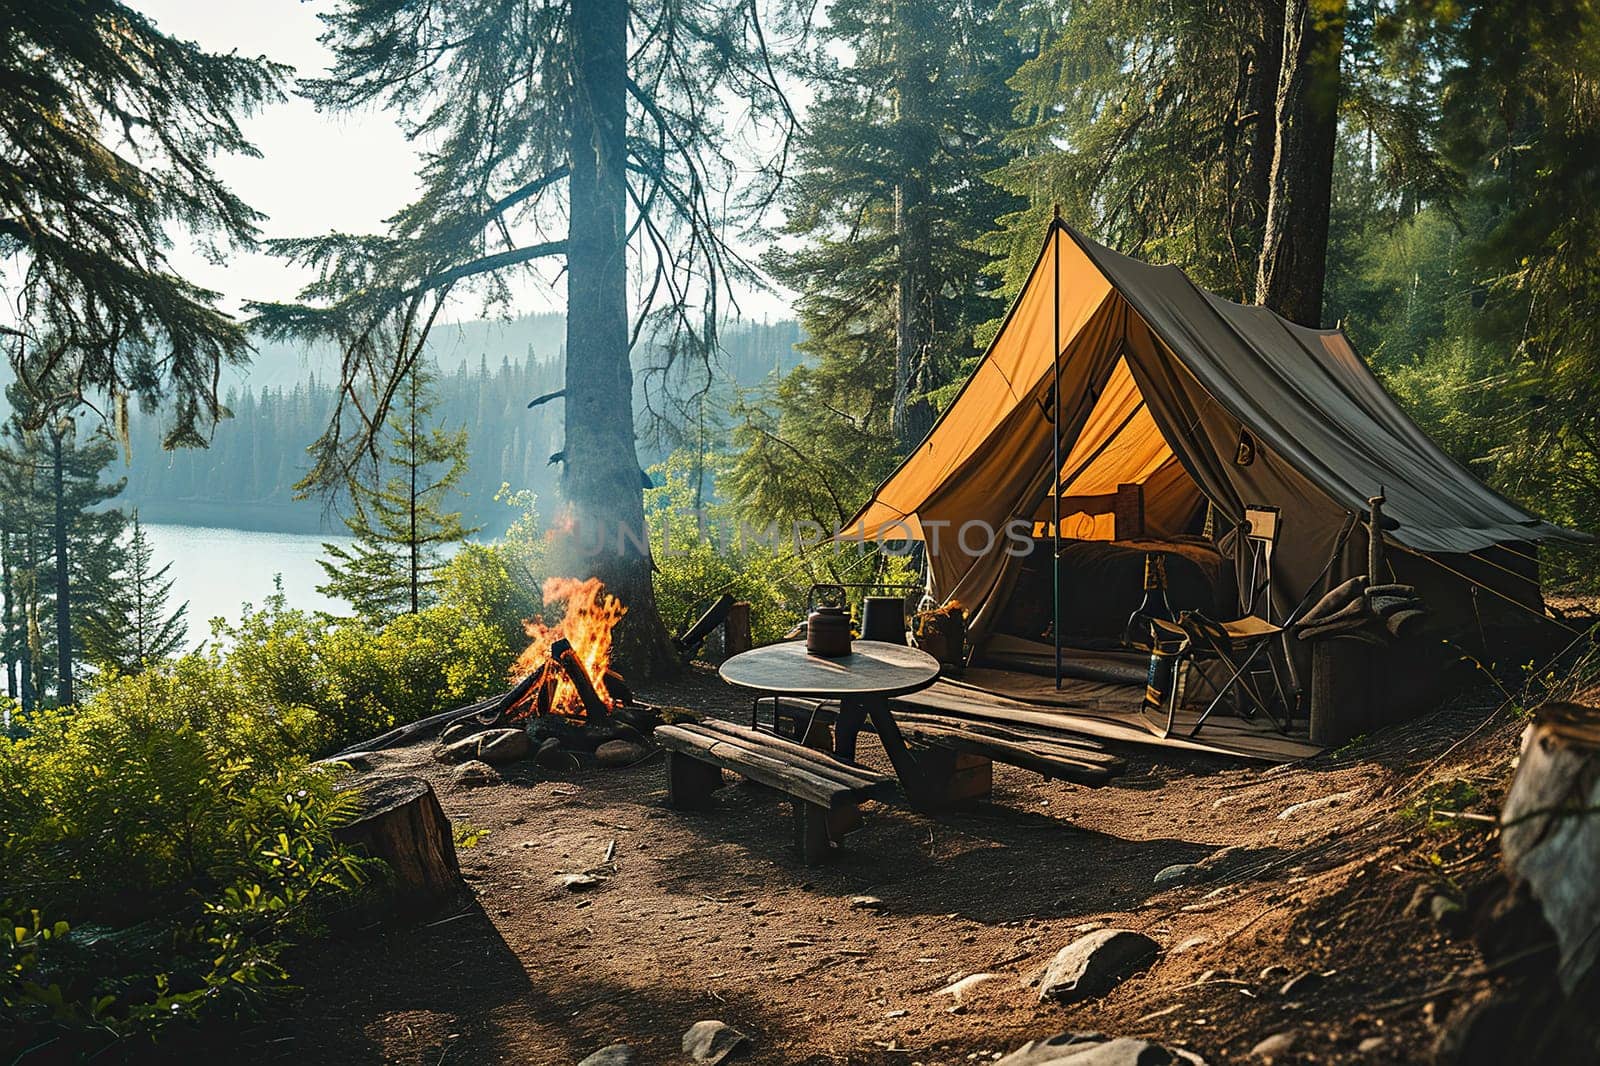 Camping with a tent and a fire in the forest.